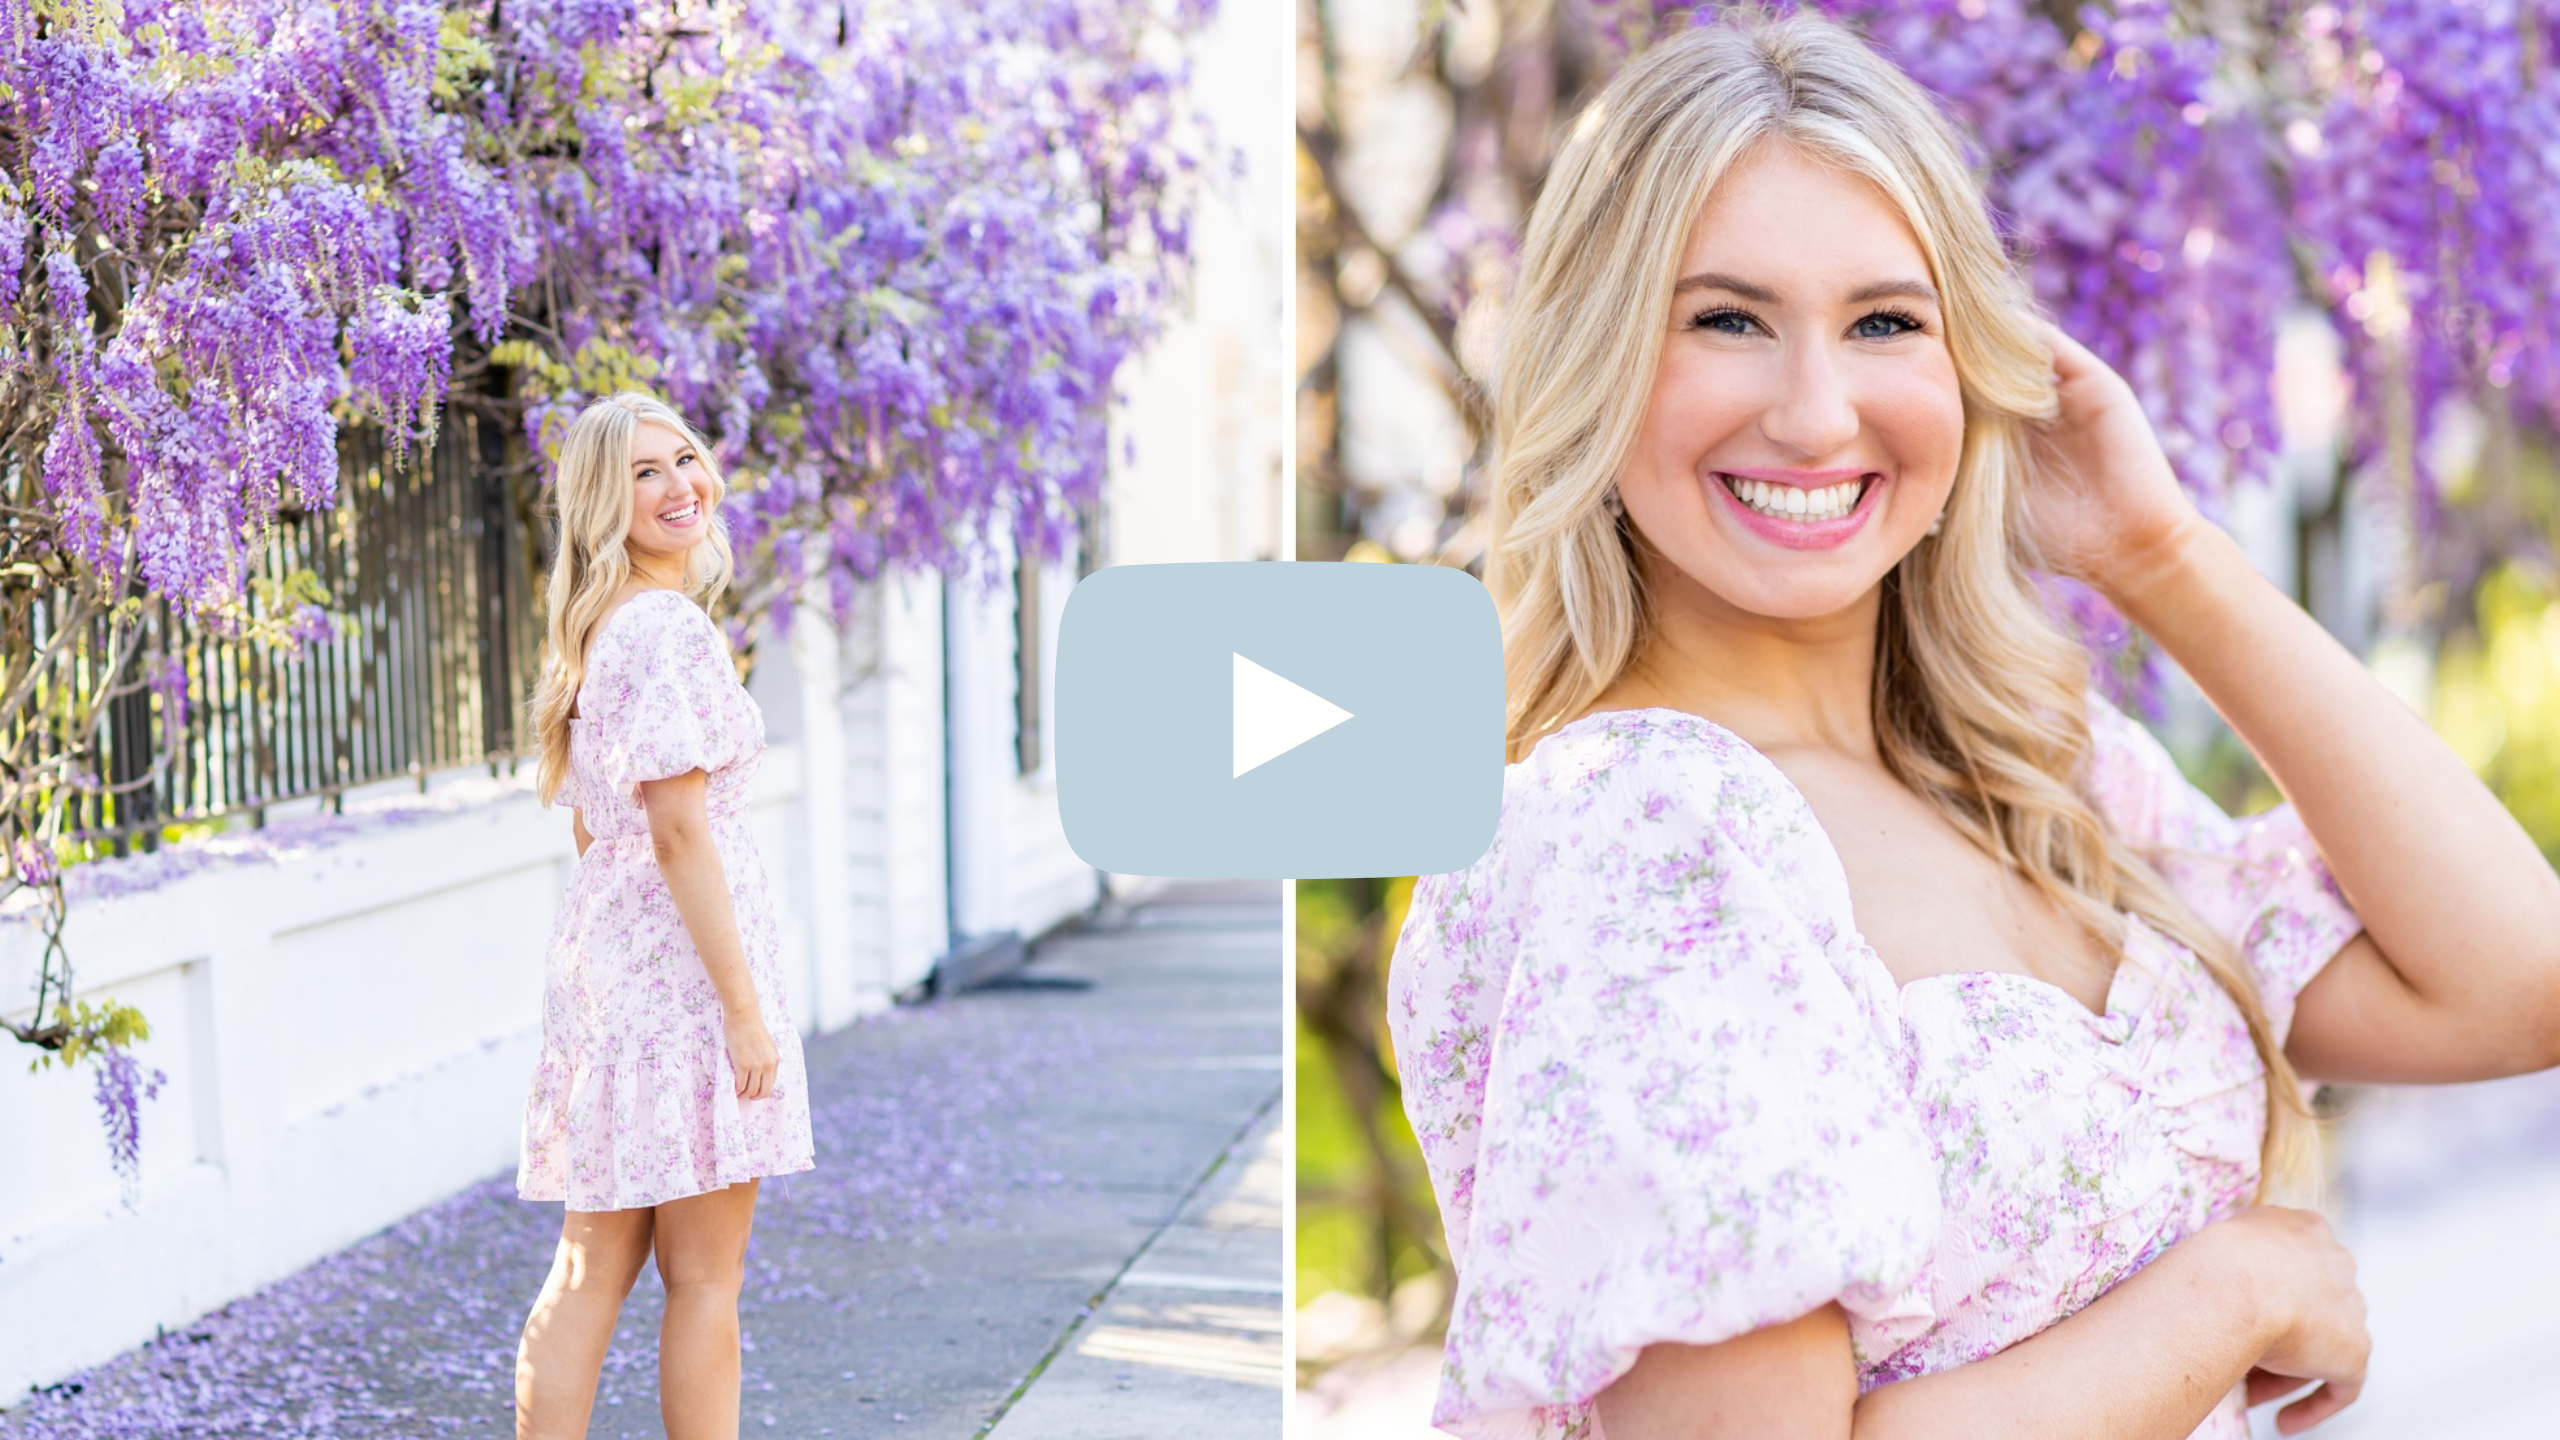 Photographing + Posing Senior Portraits with Flowers | Hope Taylor Photography